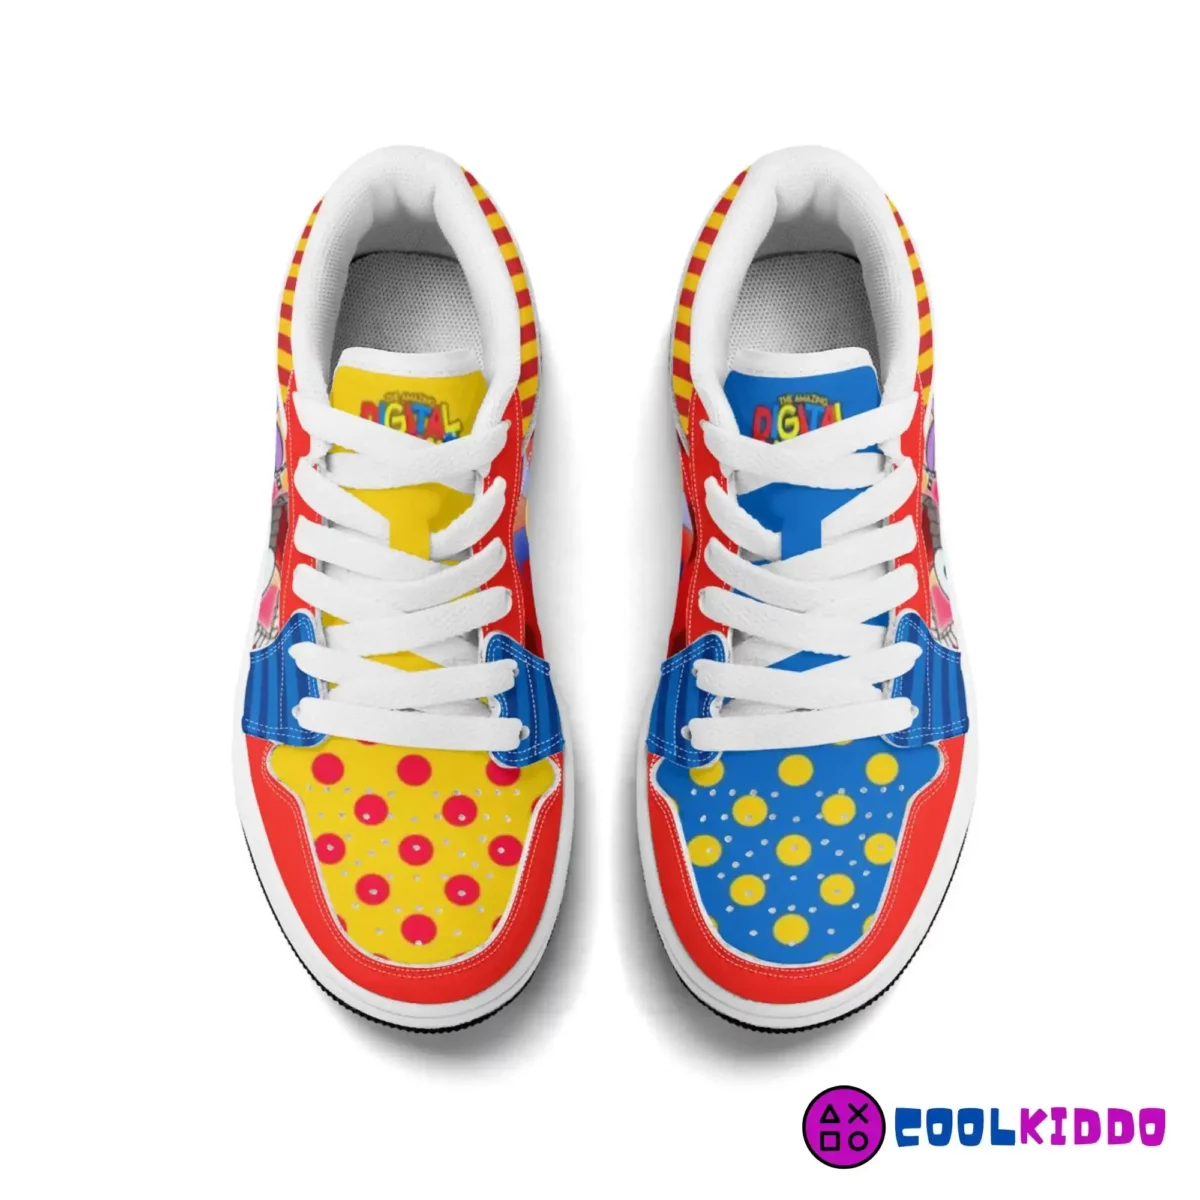 Personalized The Amazing Digital Circus Leather Low-Top Sneakers for Kids | Unisex Casual Shoes Cool Kiddo 20